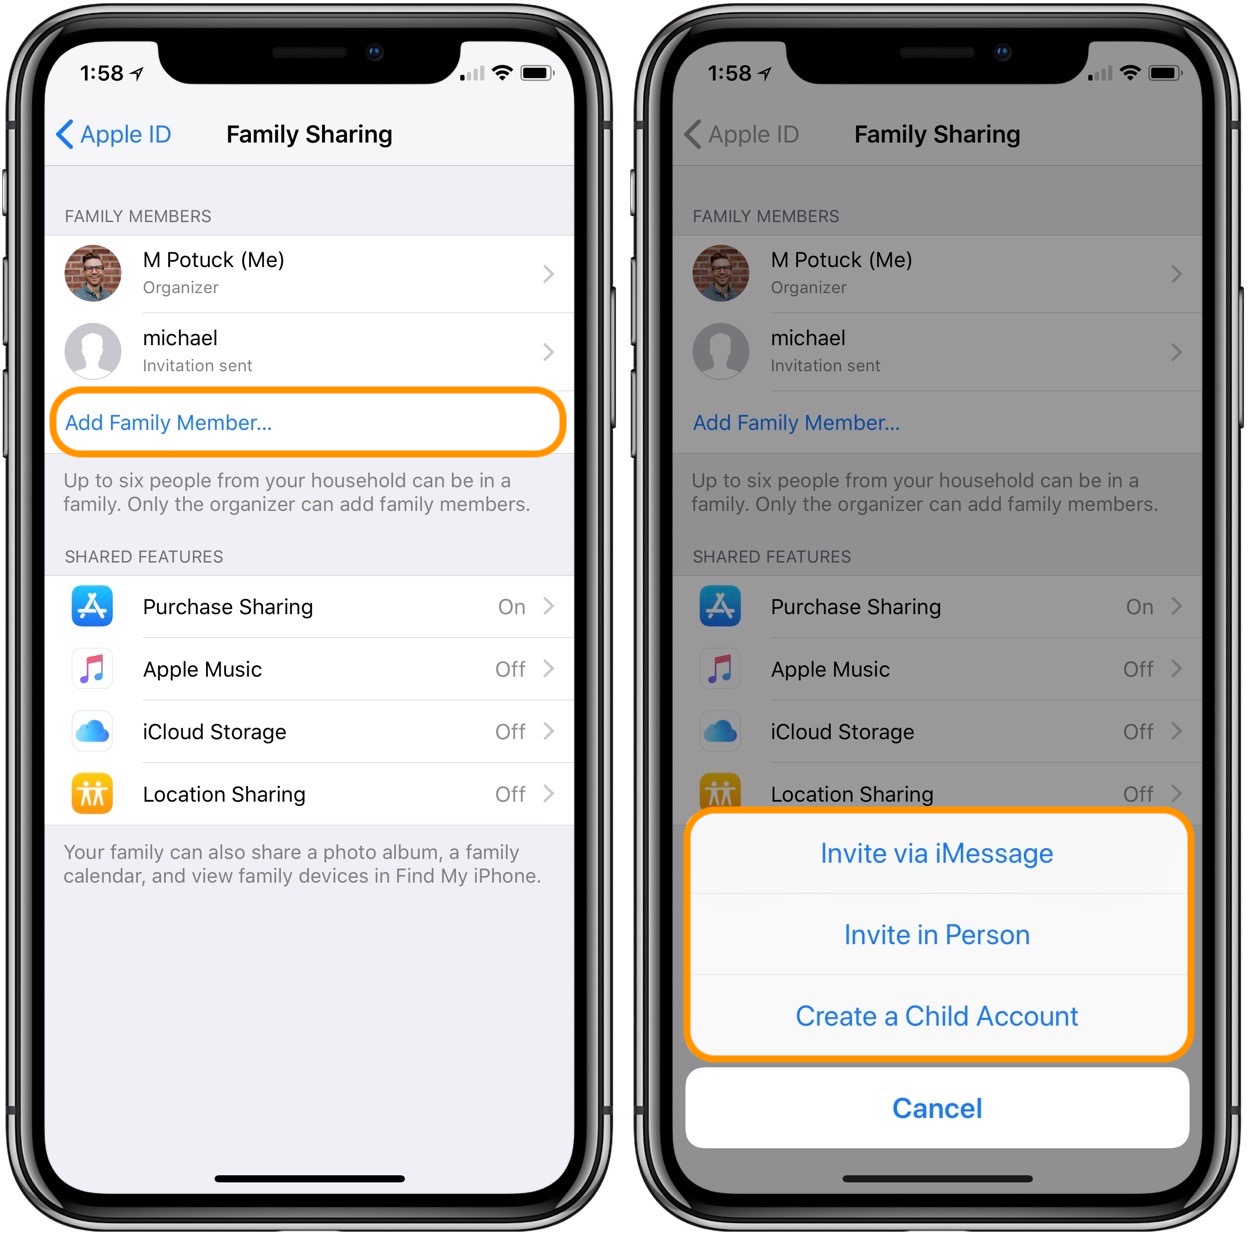 How to set up Family Sharing and create a child's Apple ID on iPhone